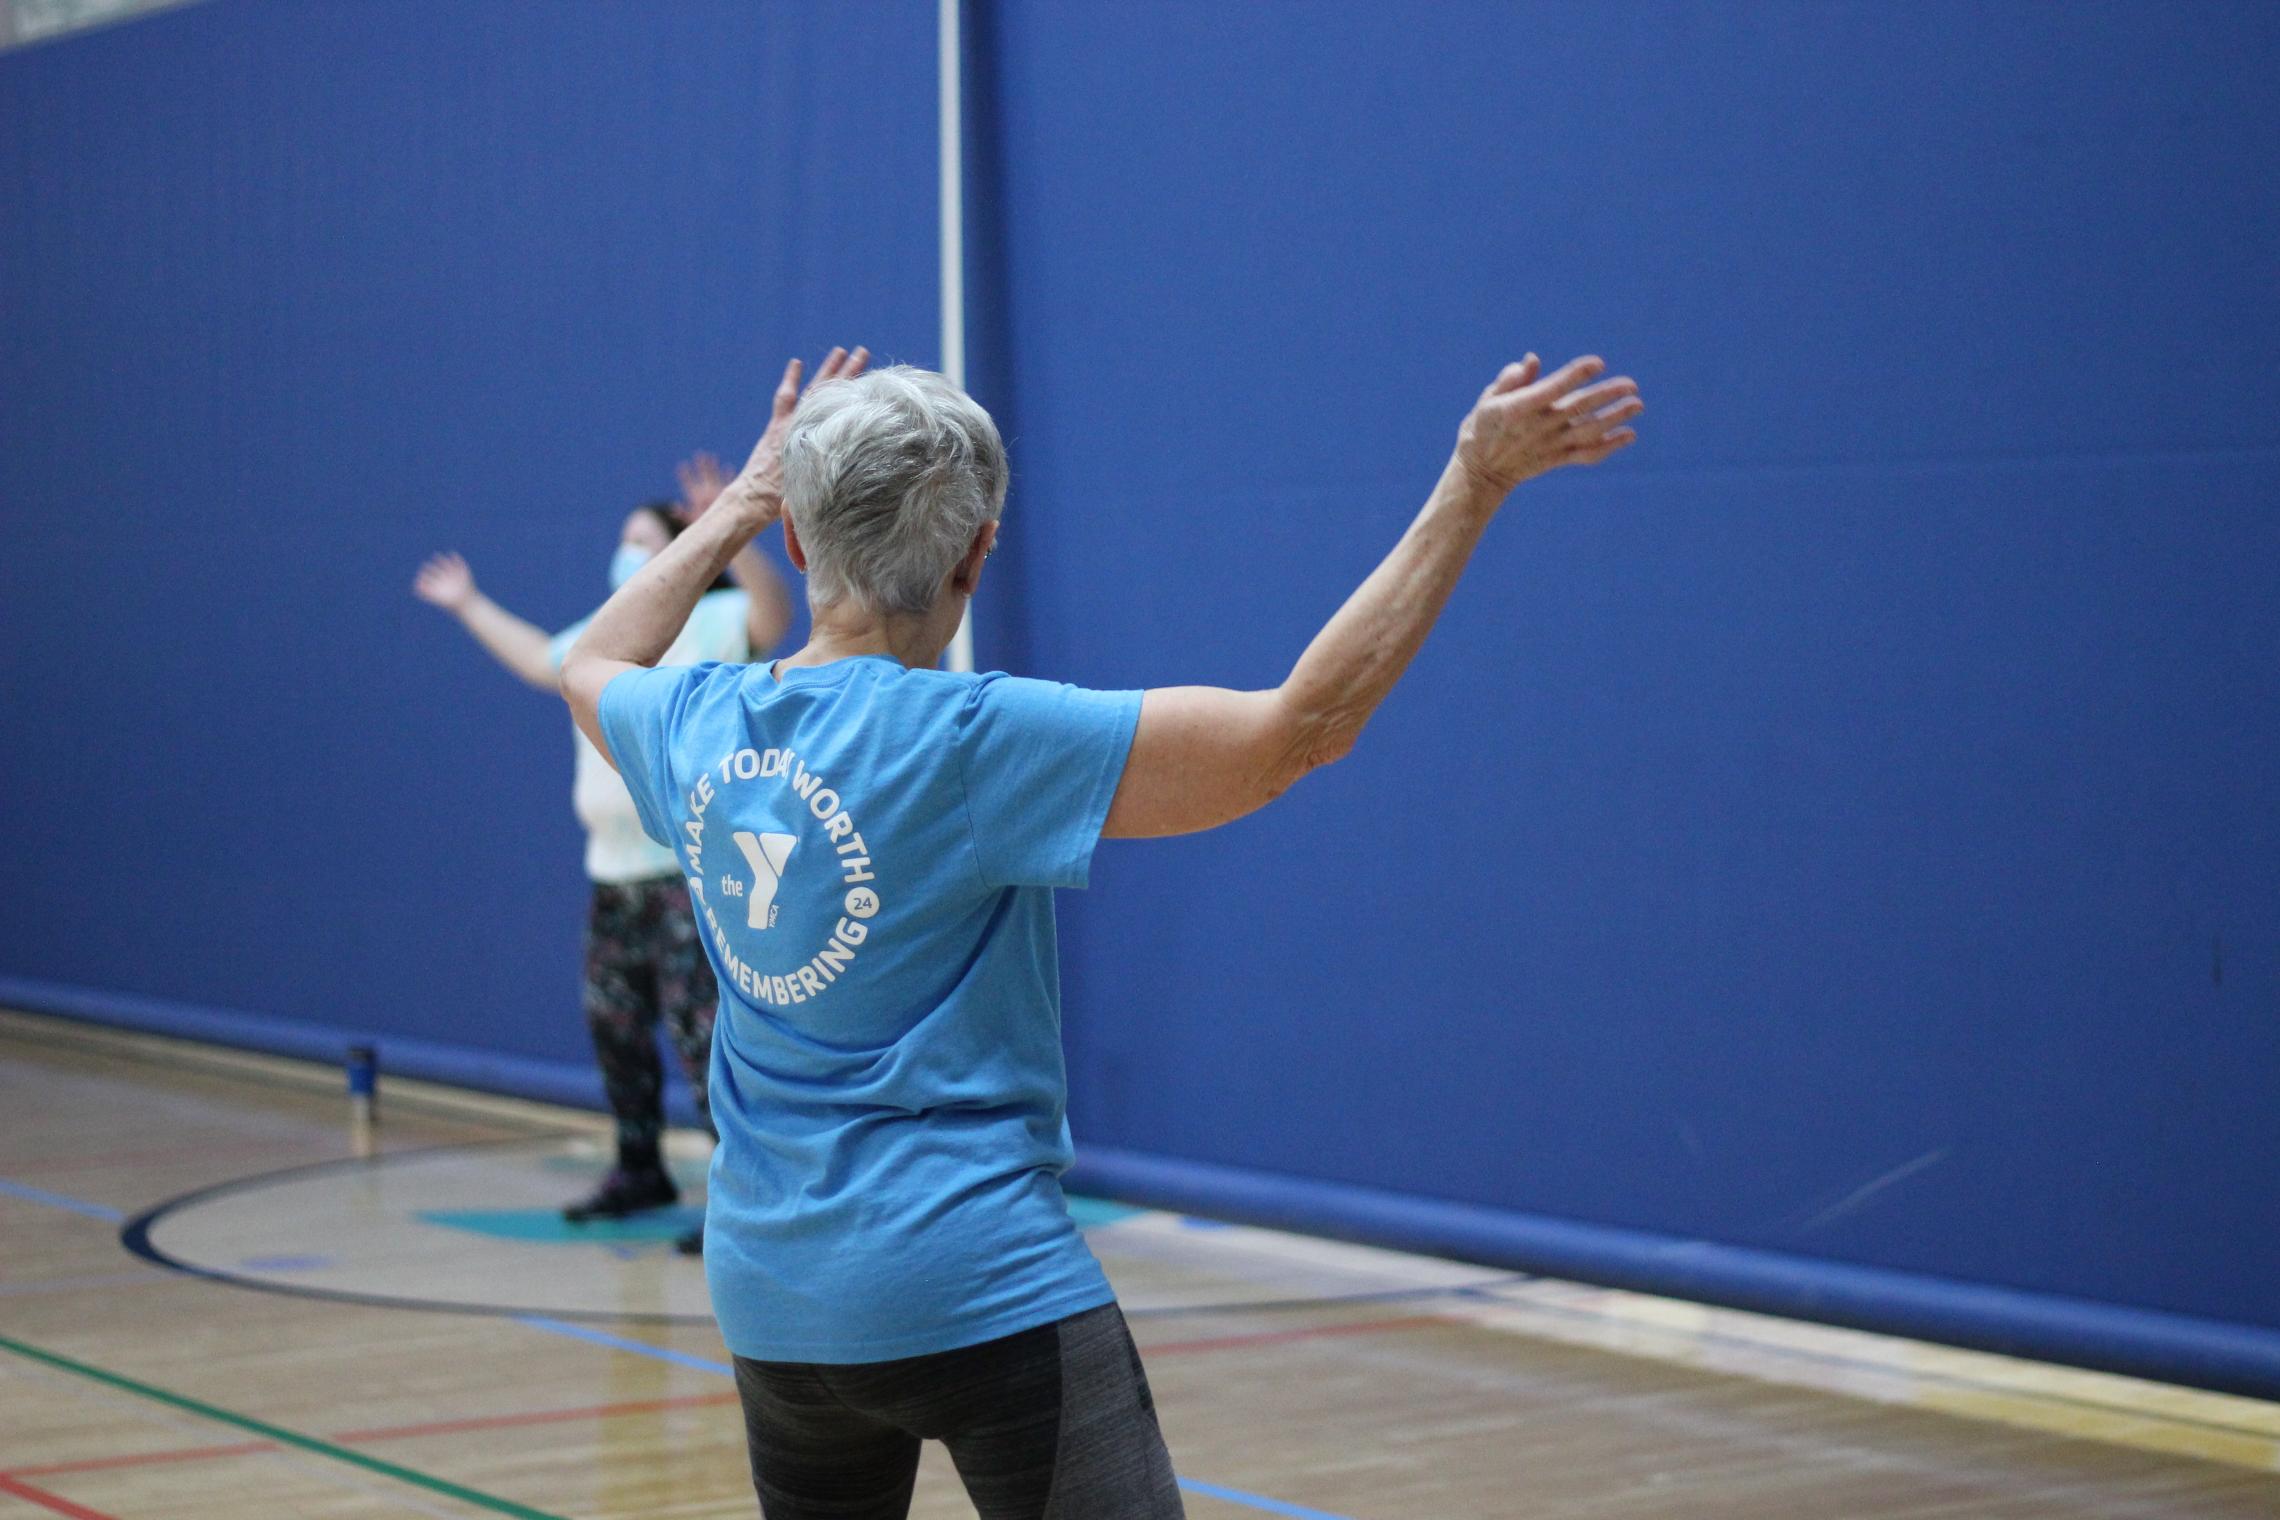 Group exercise instructor leads class at the YMCA